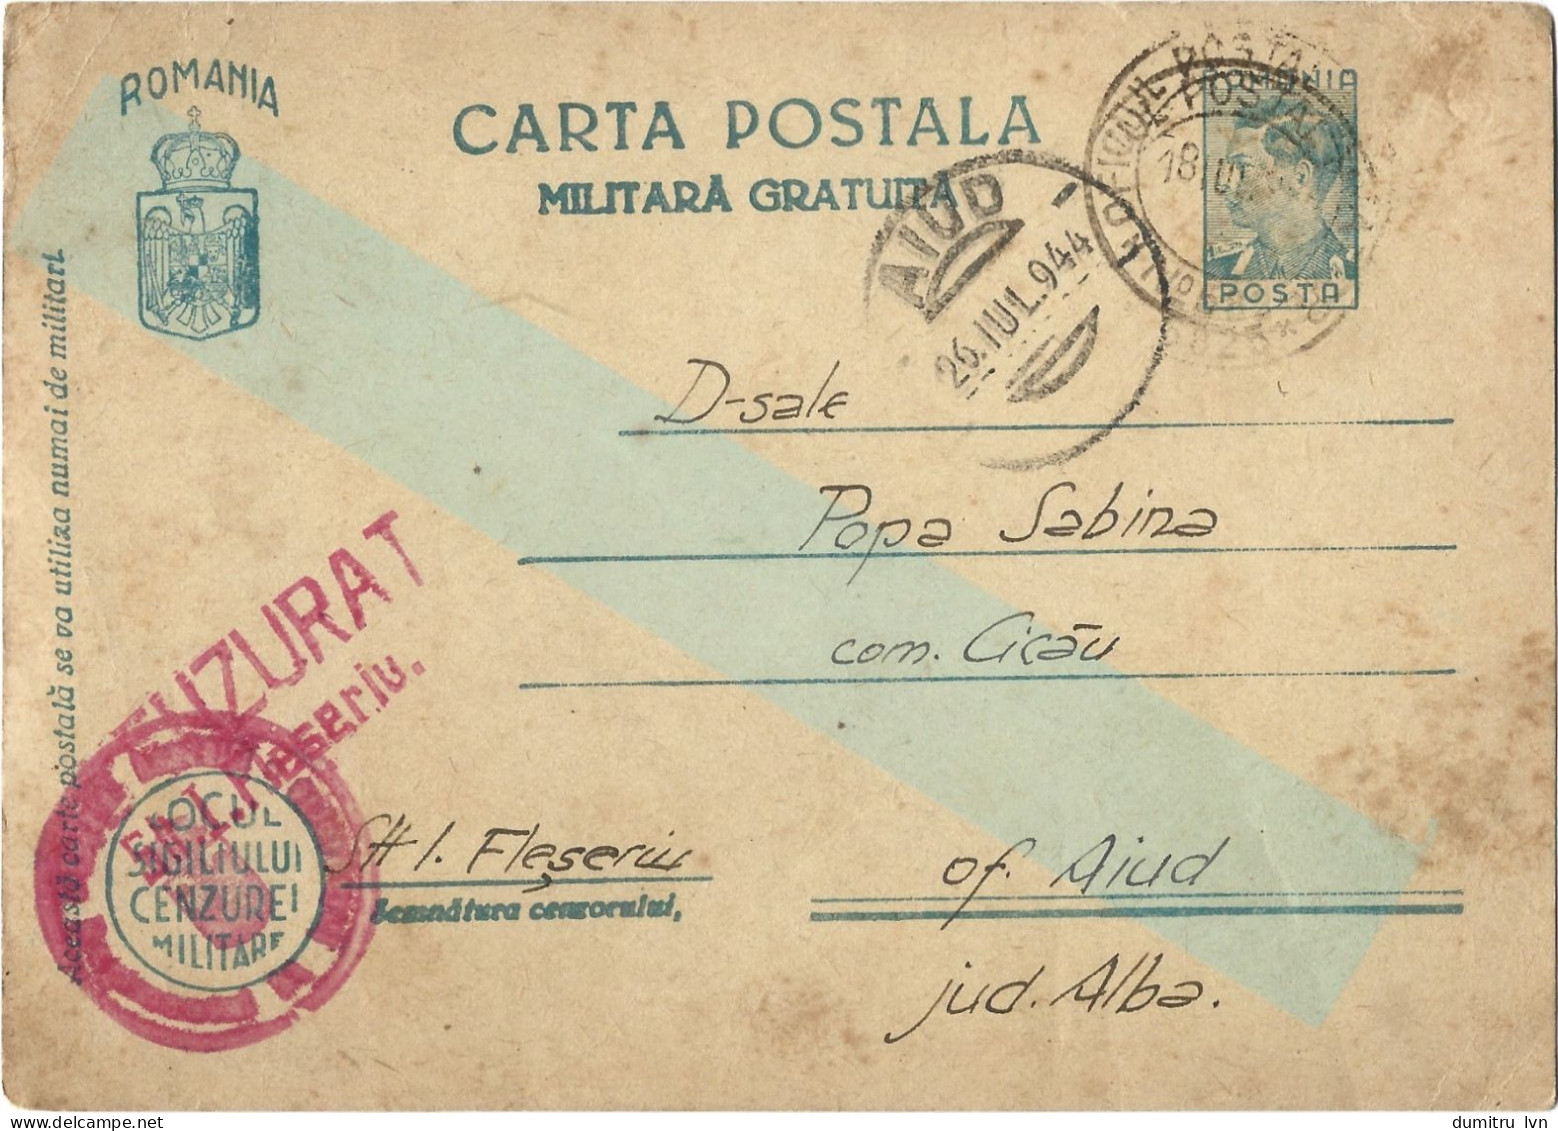 ROMANIA 1944 FREE MILITARY POSTCARD, MILITARY CENSORED, OPM 5825, POSTCARD STATIONERY - 2. Weltkrieg (Briefe)